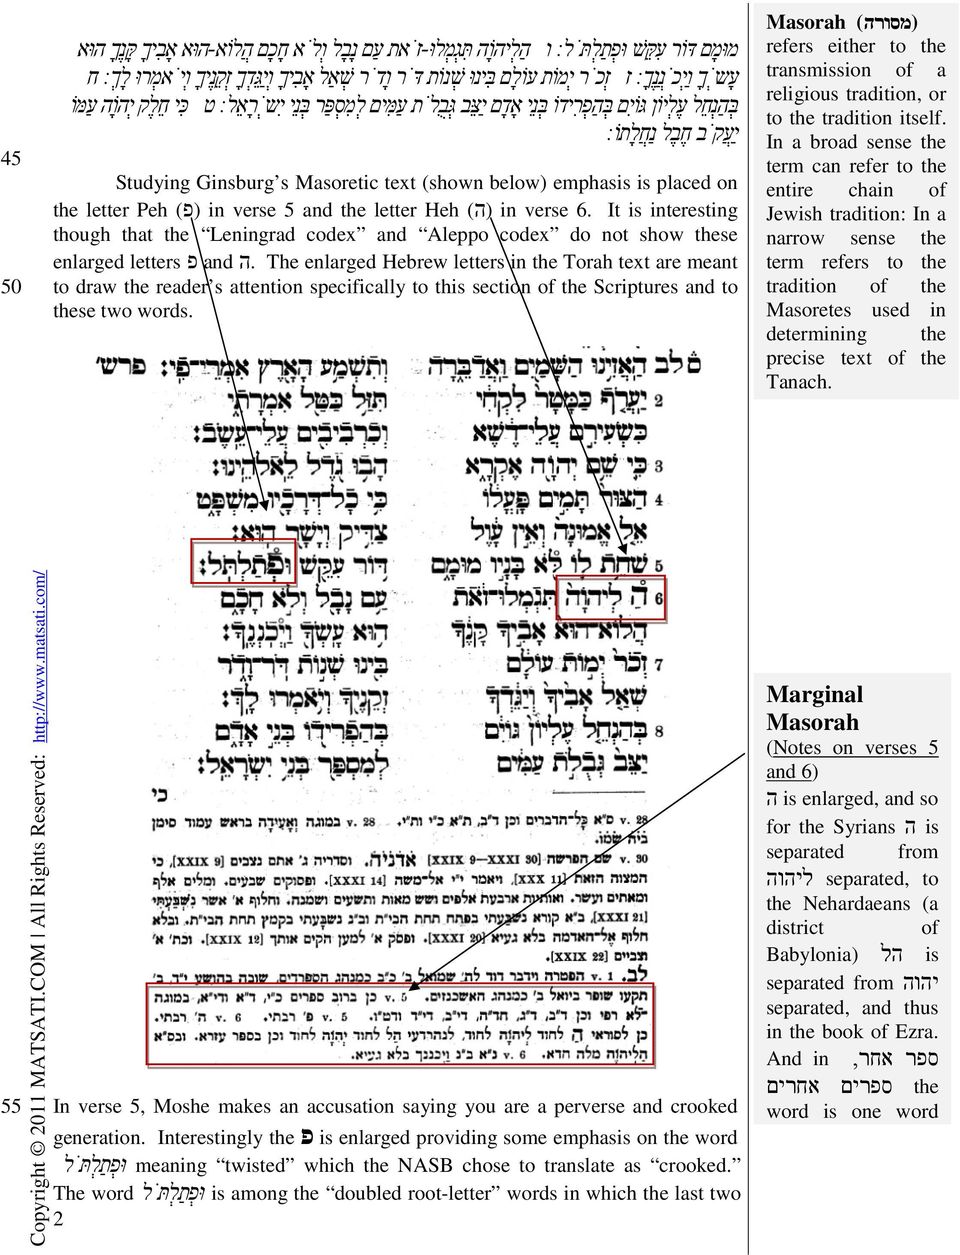 (shown below) emphasis is placed on the letter Peh (פ) in verse 5 and the letter Heh (ה) in verse 6.